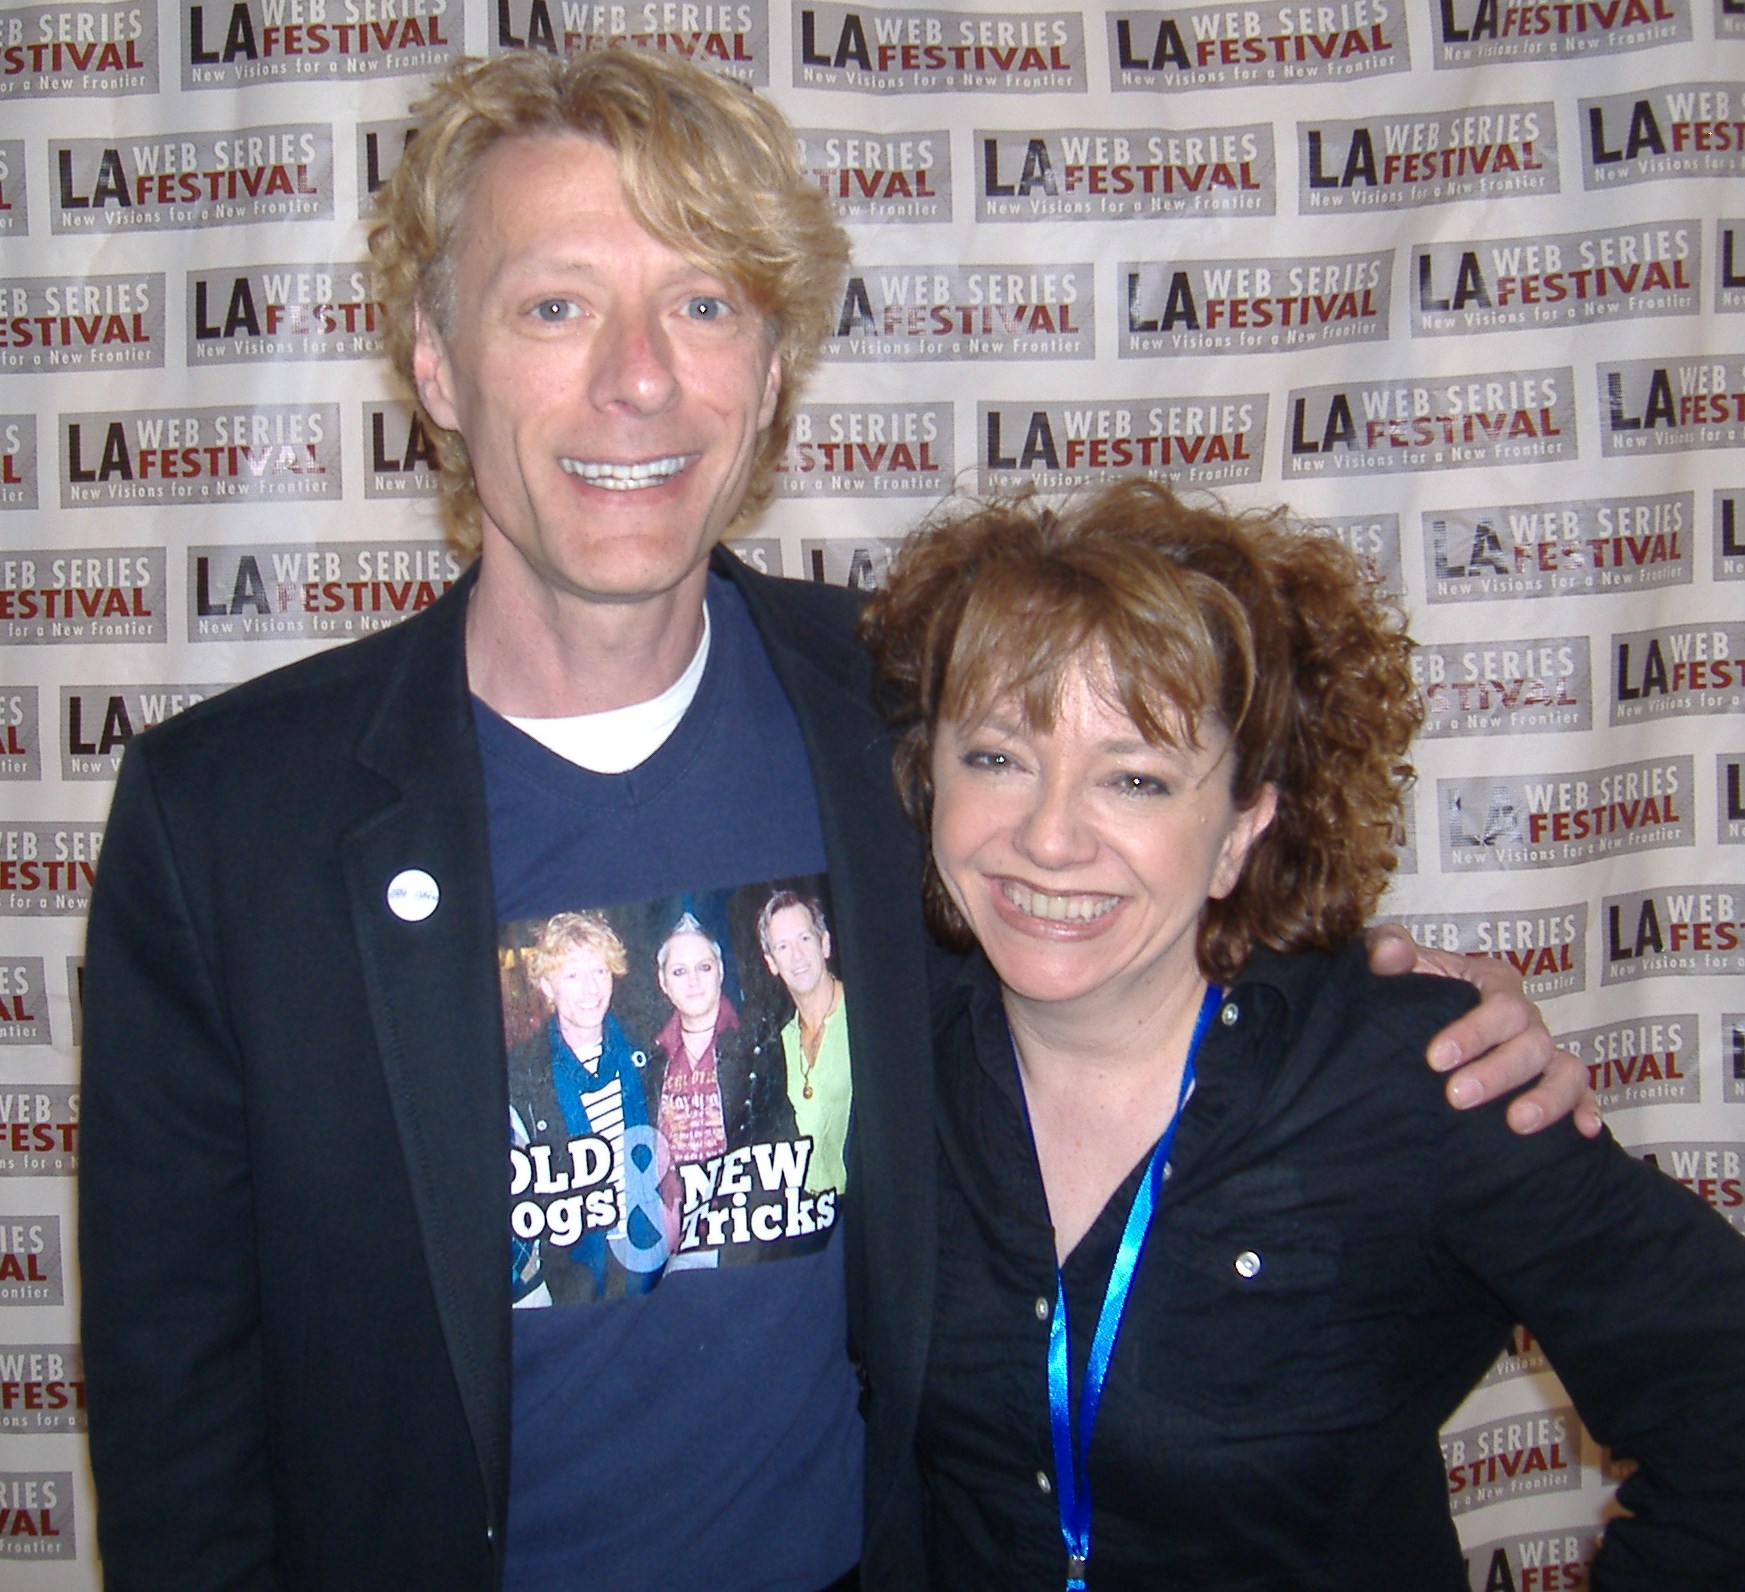 Leon Acord with Robin Shelby at the 2012 LA Web Fest